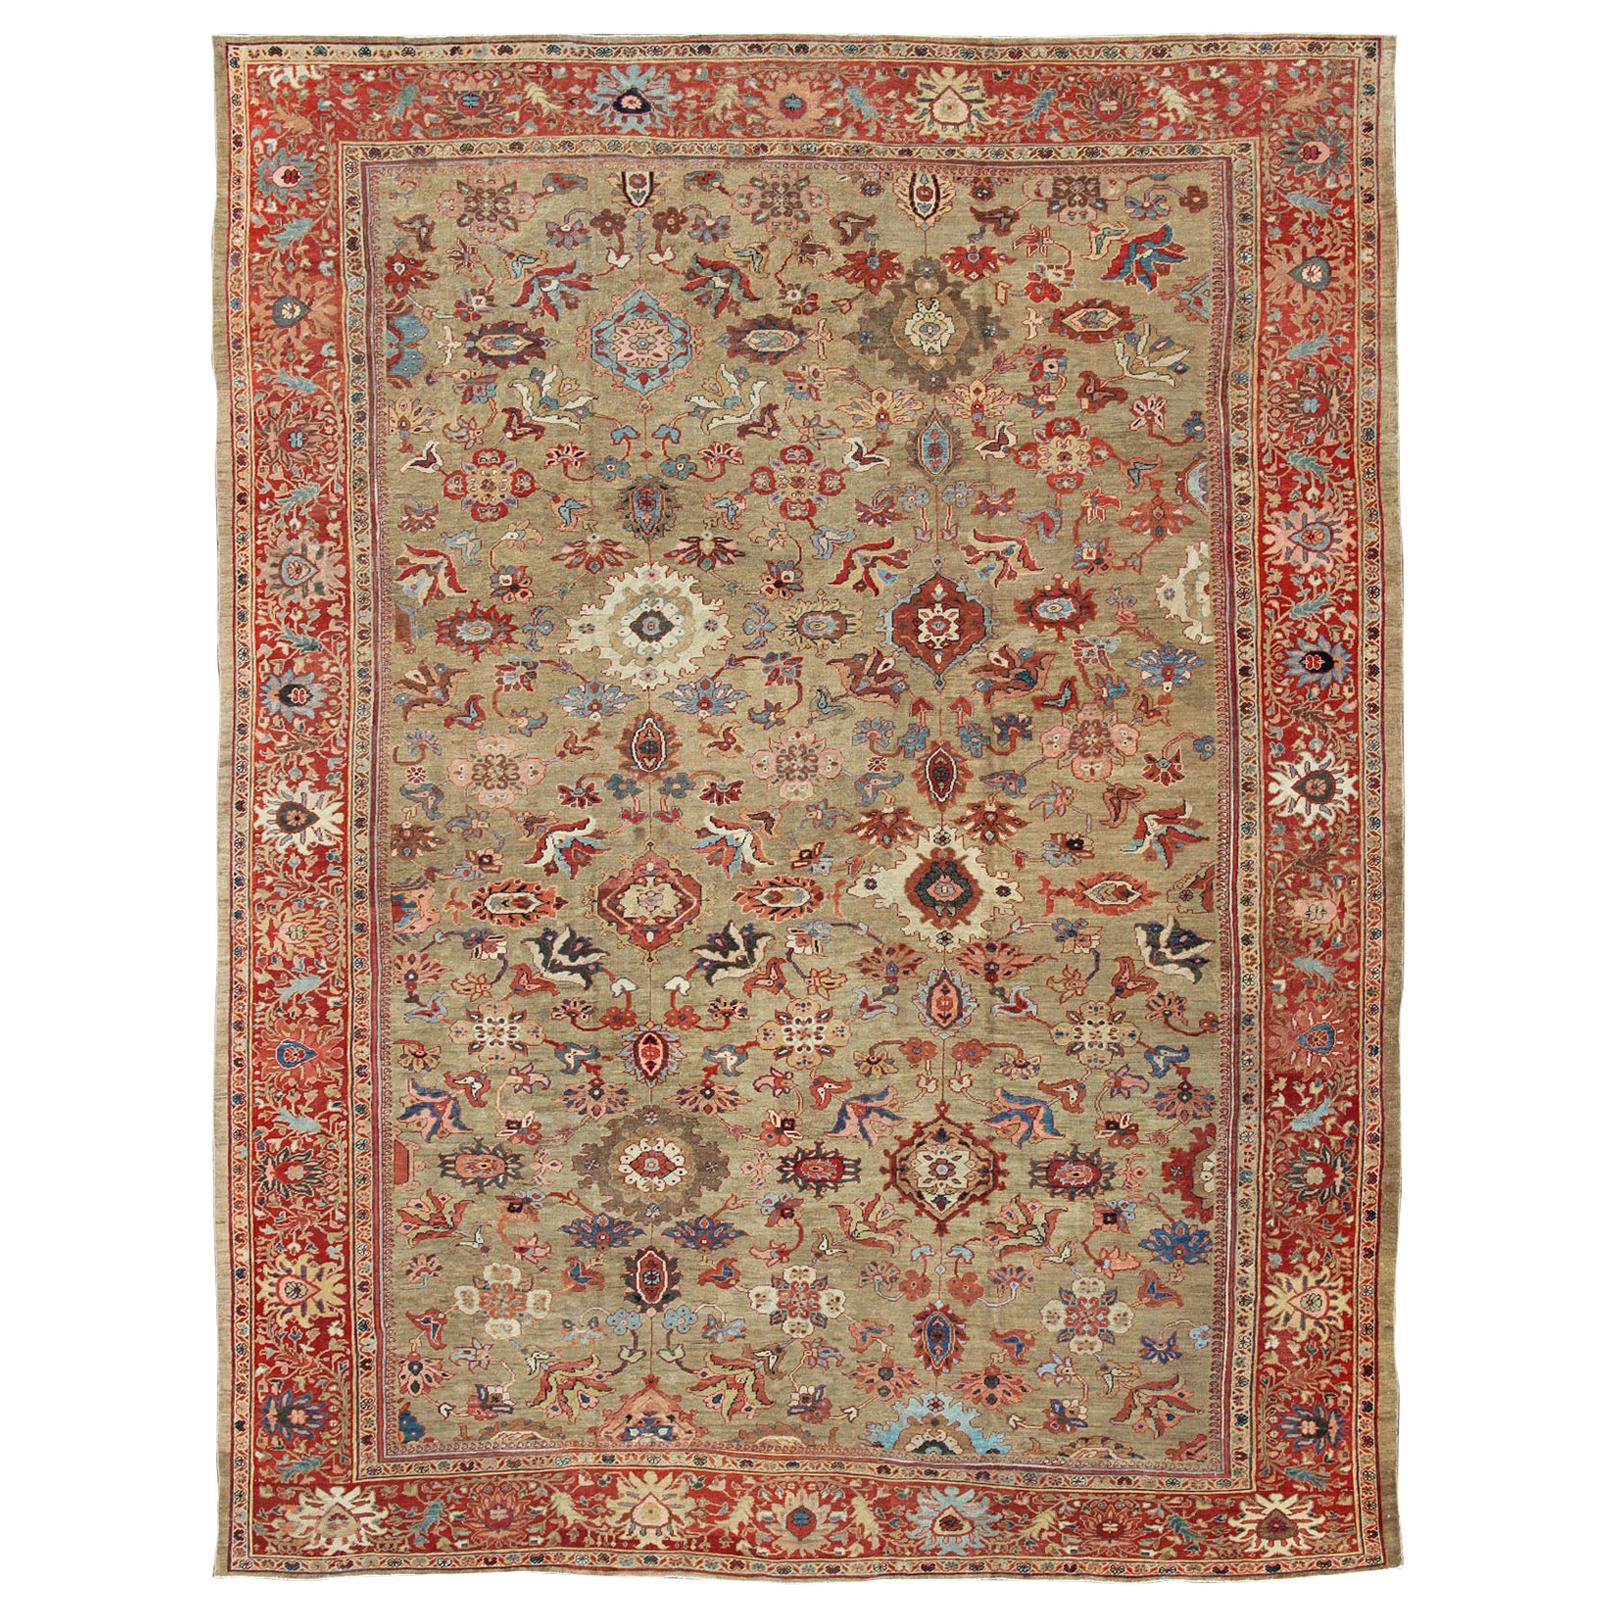 Antique Persian Large Ziegler Sultanabad Rug with Tan Background & Red Border